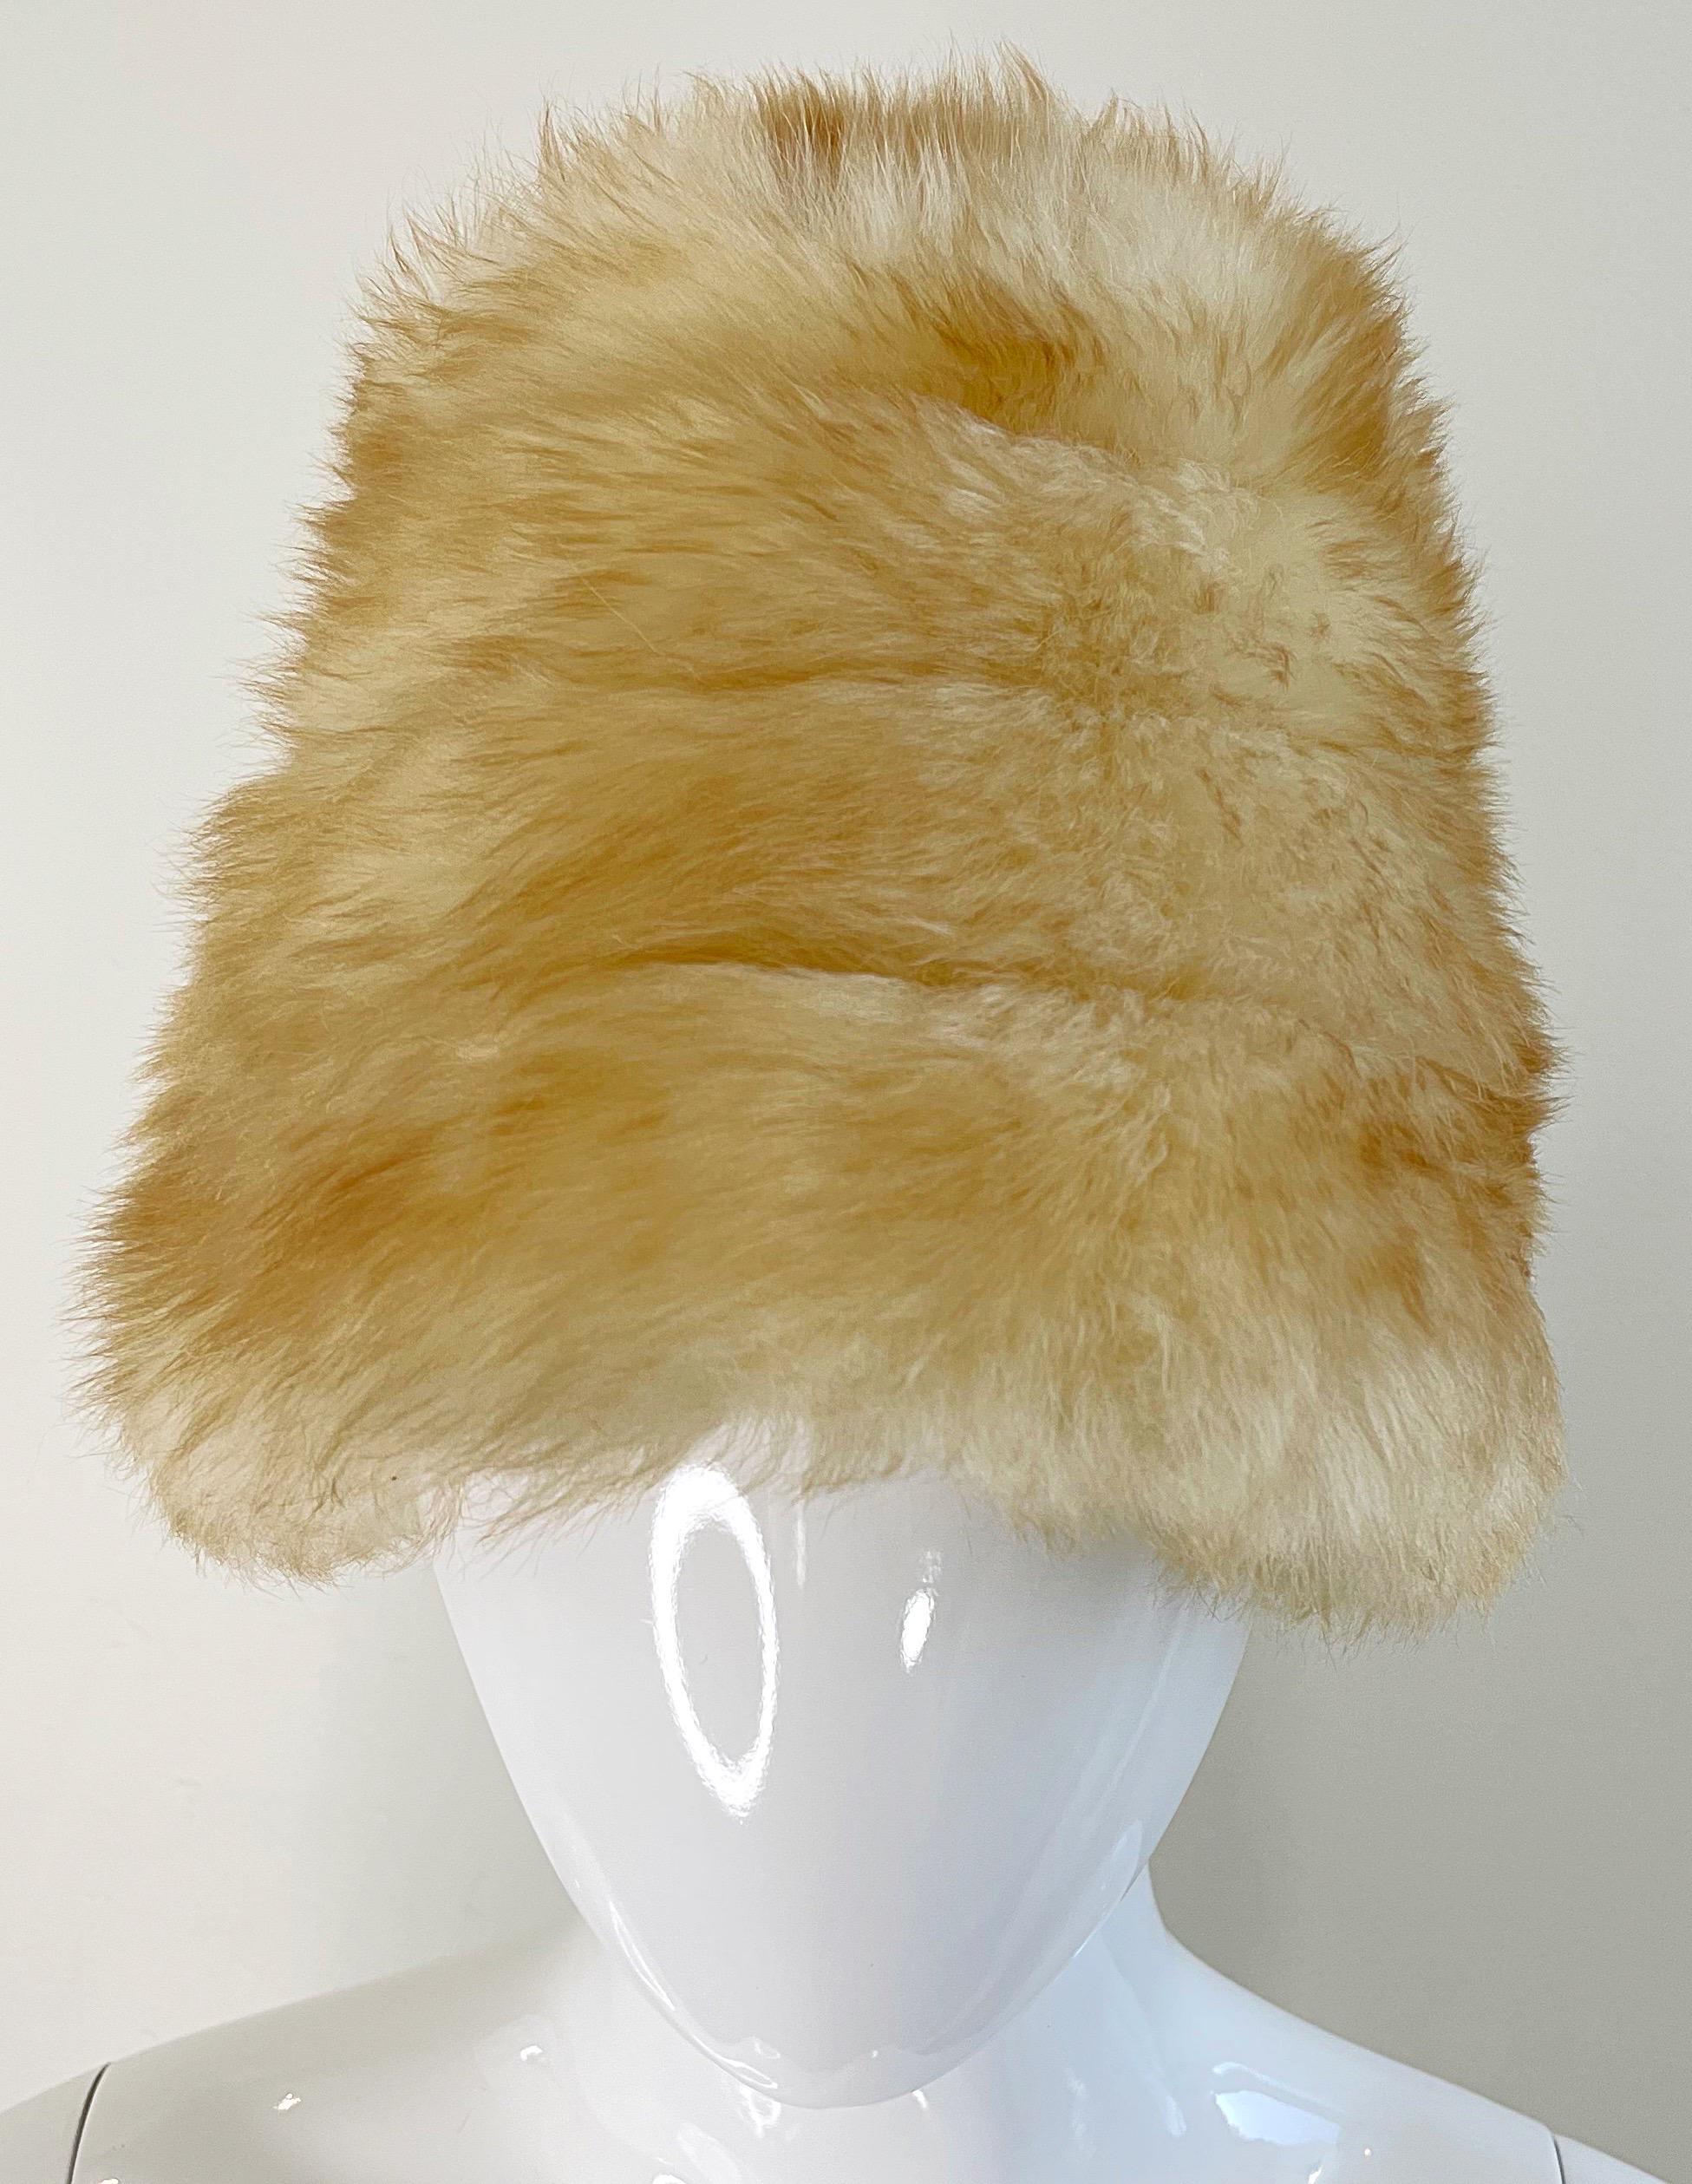 Yves Saint Laurent Fall 1976 Russian Collection Shearling Honey Tan Fur Hat 70s 8